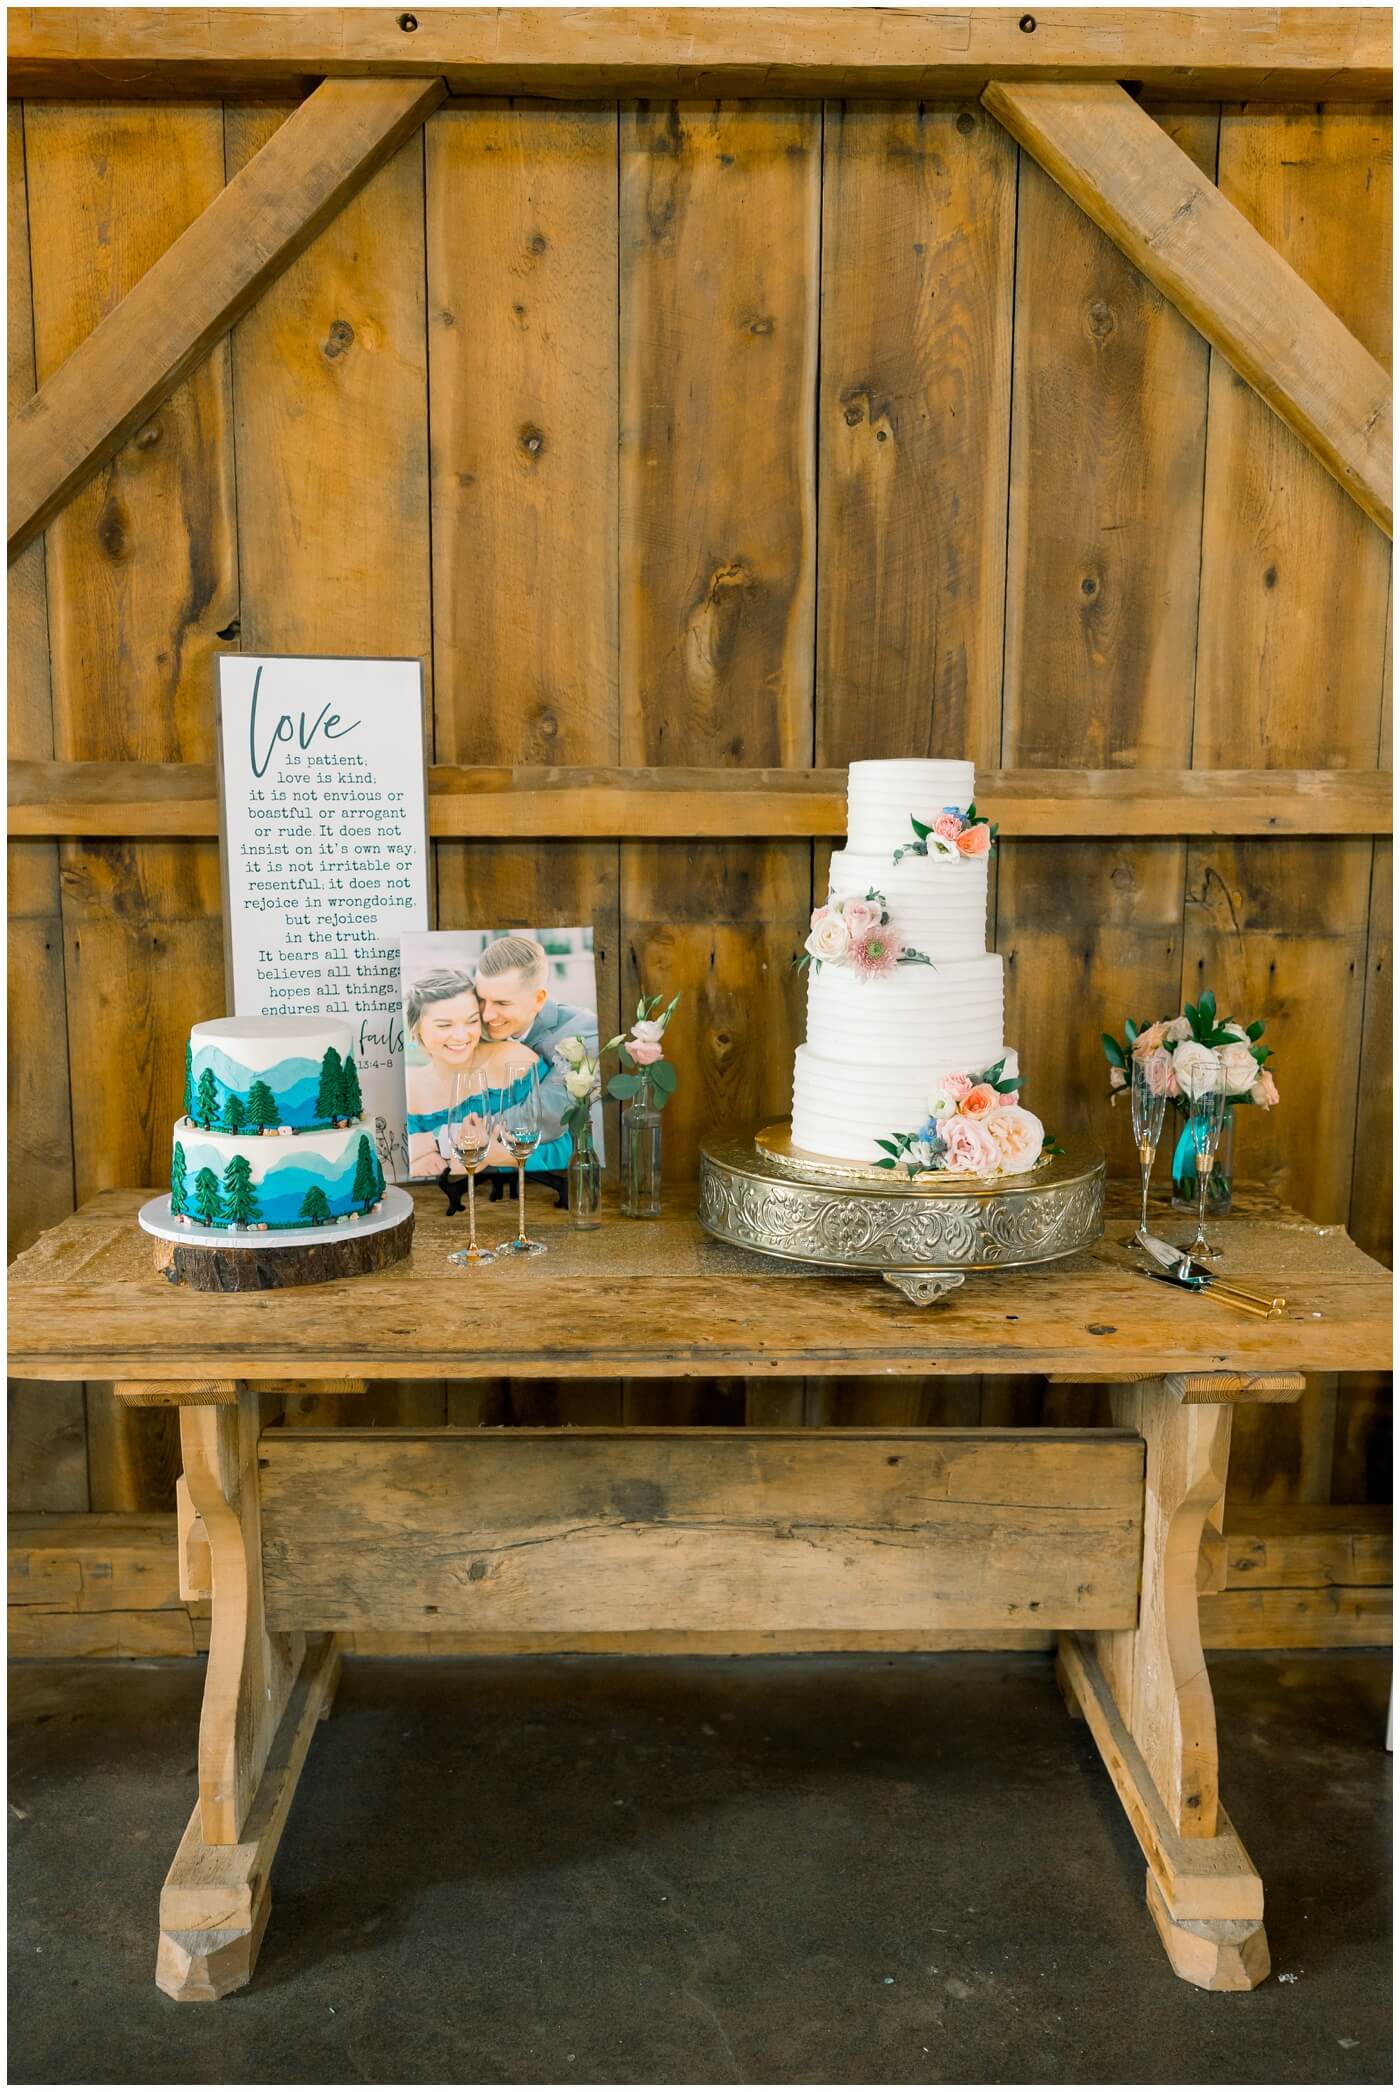 The cake table is beautifully prepared with flowers and greenery